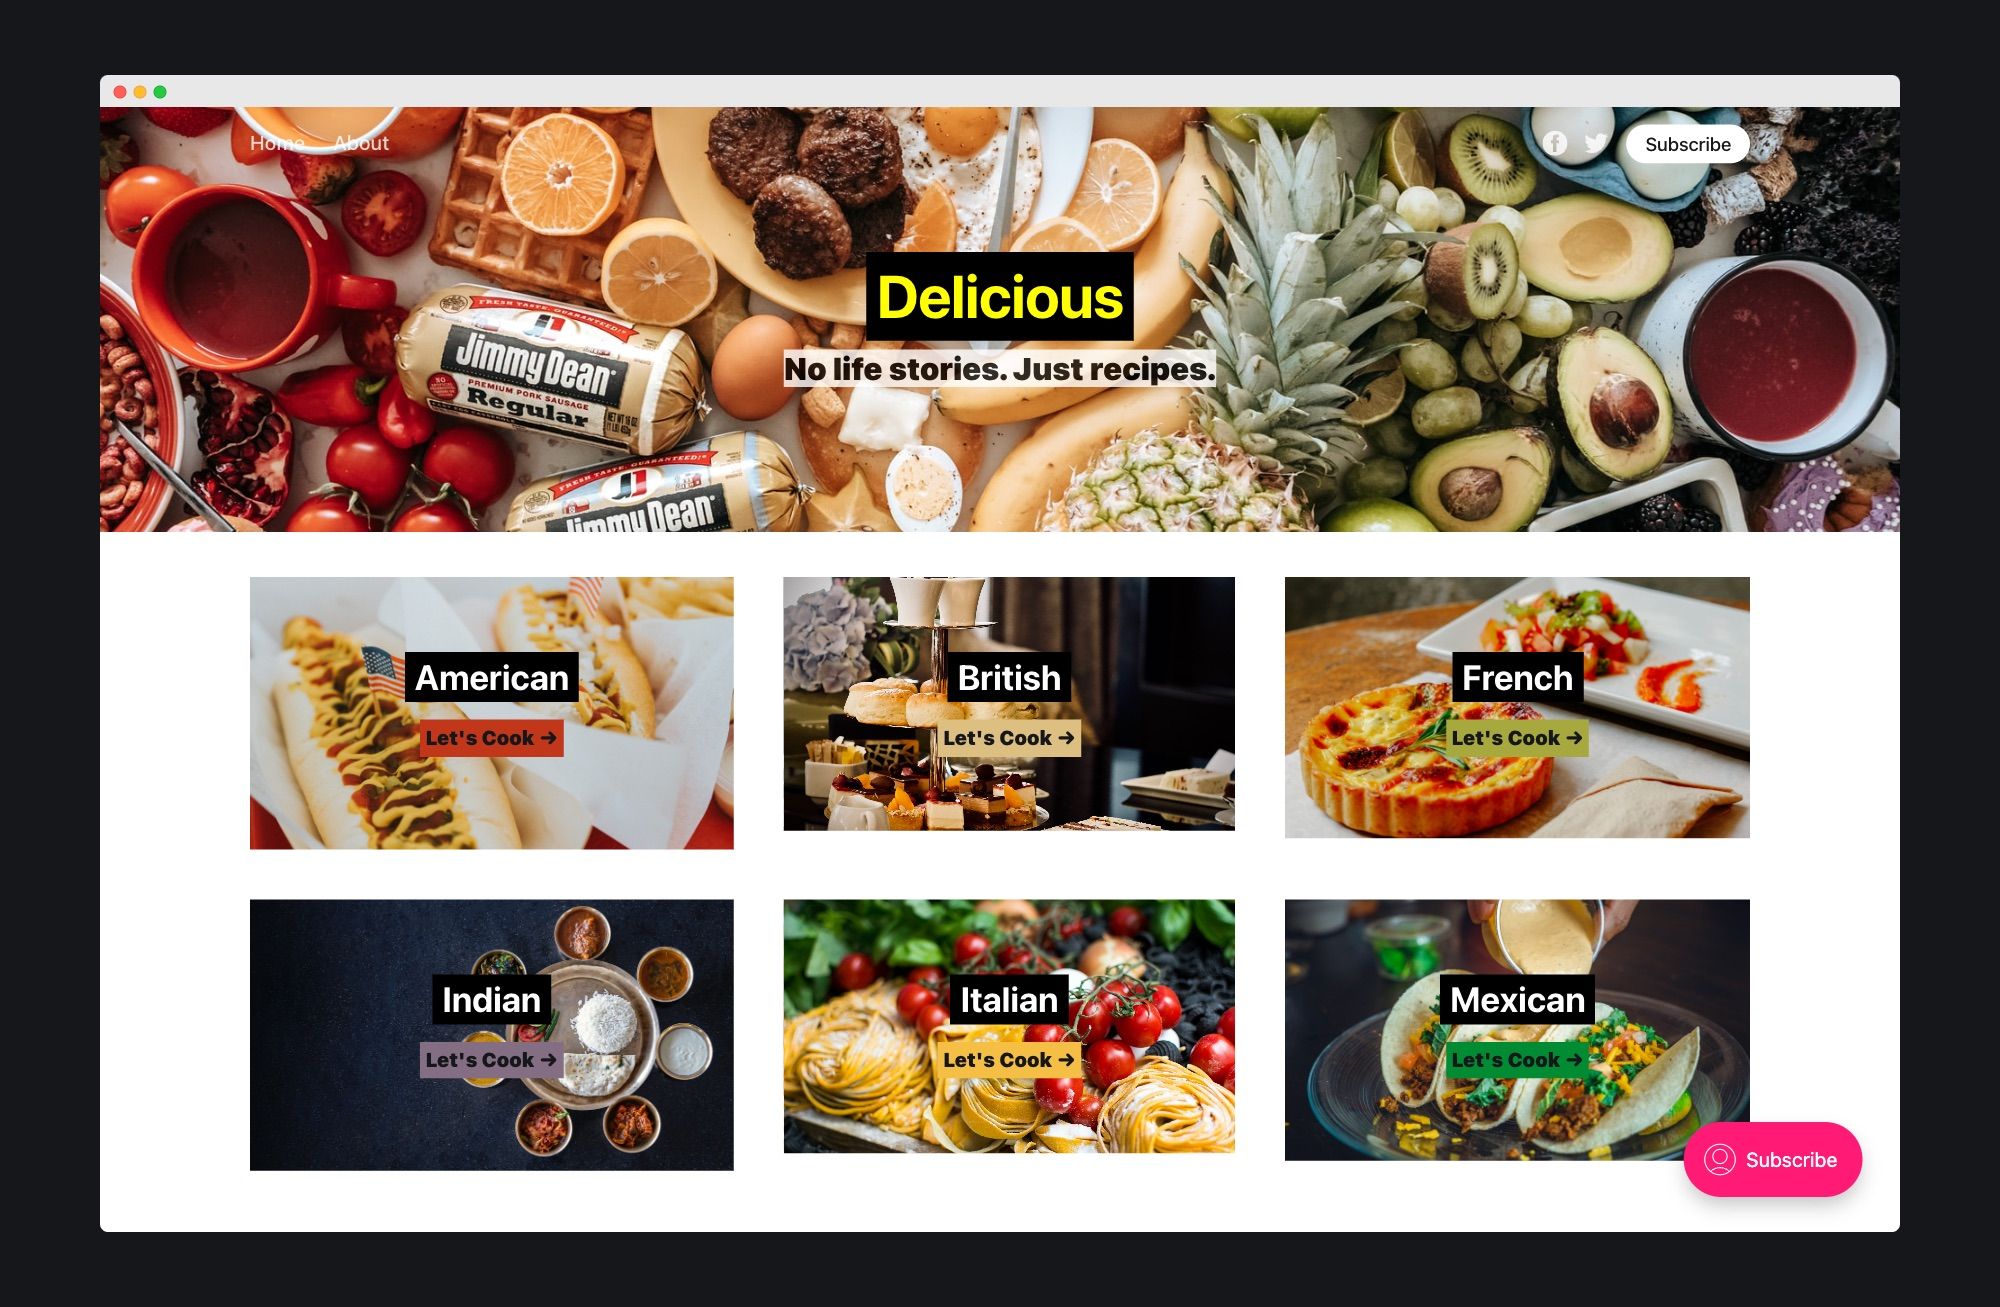 Website showing cuisine collections